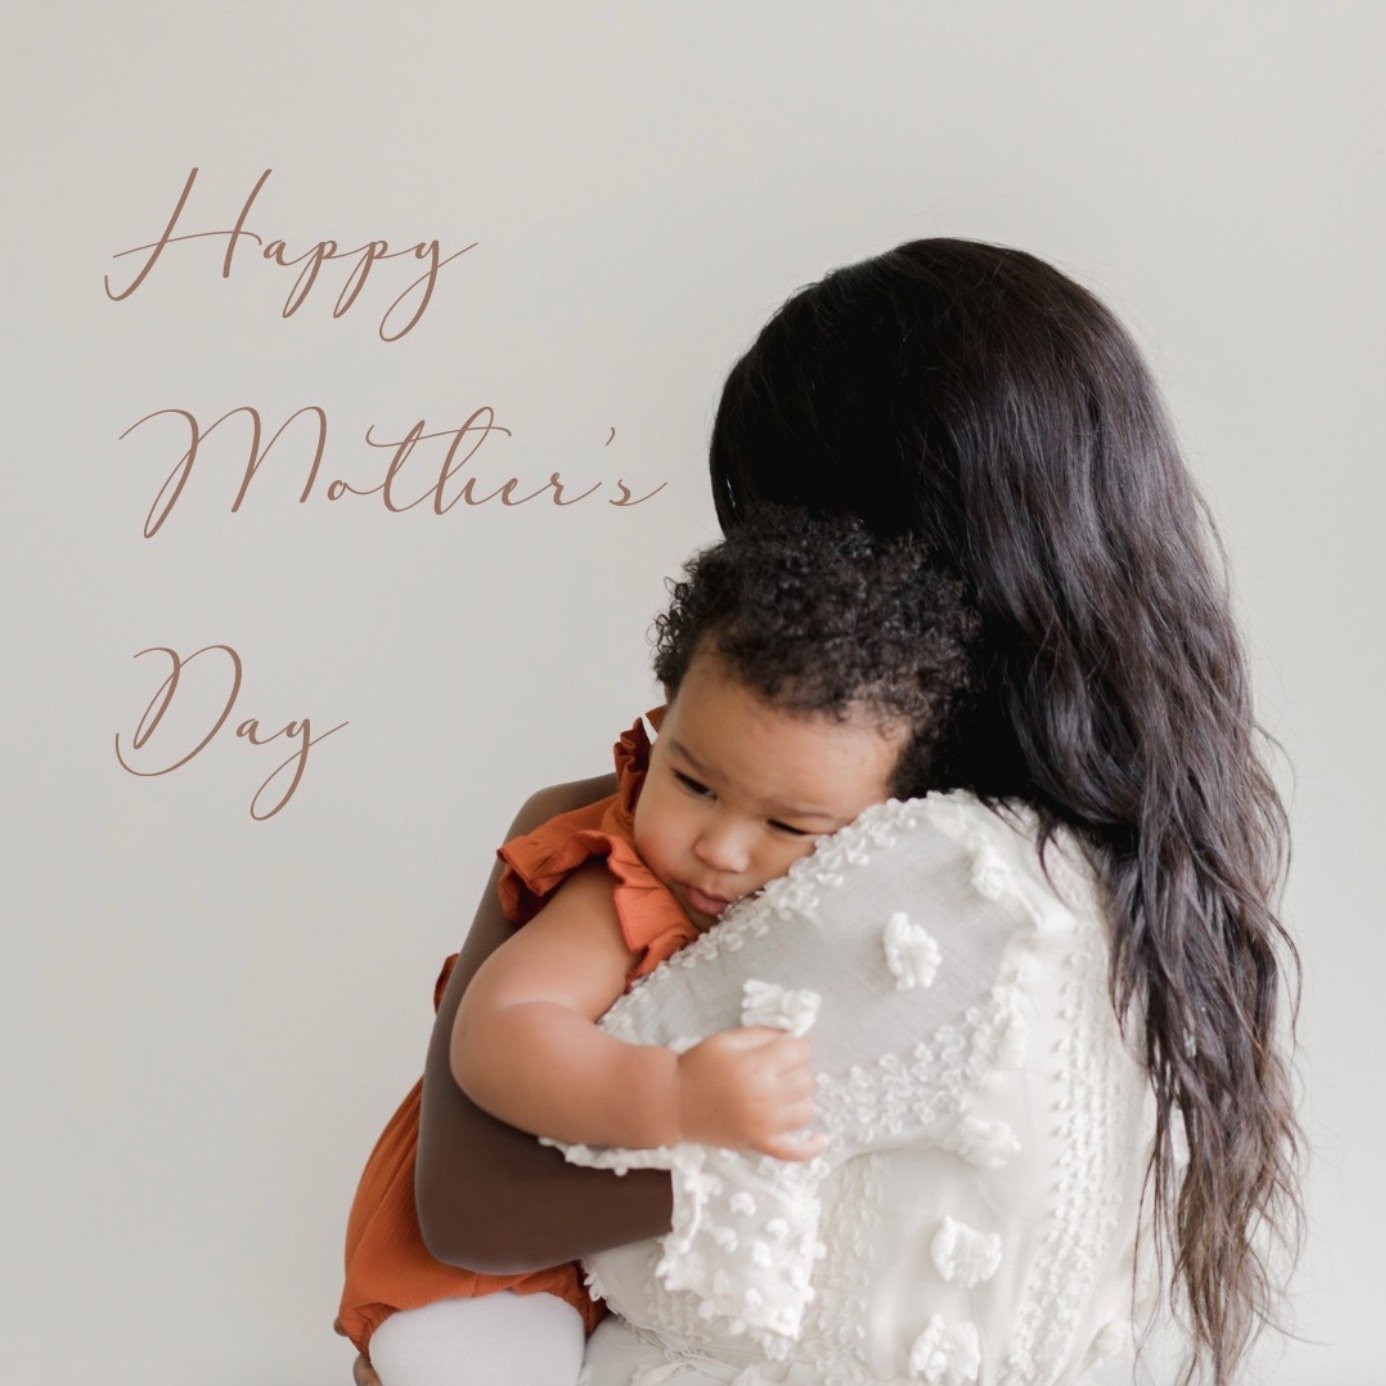 Happy Mother's Day to all the amazing moms out there 💕 ⁠
⁠
Today, we want to take a moment to recognize and celebrate all types of moms, including adoptive moms, stepmoms, foster moms, grandmothers, anyone who act as mom, and moms who are no longer 